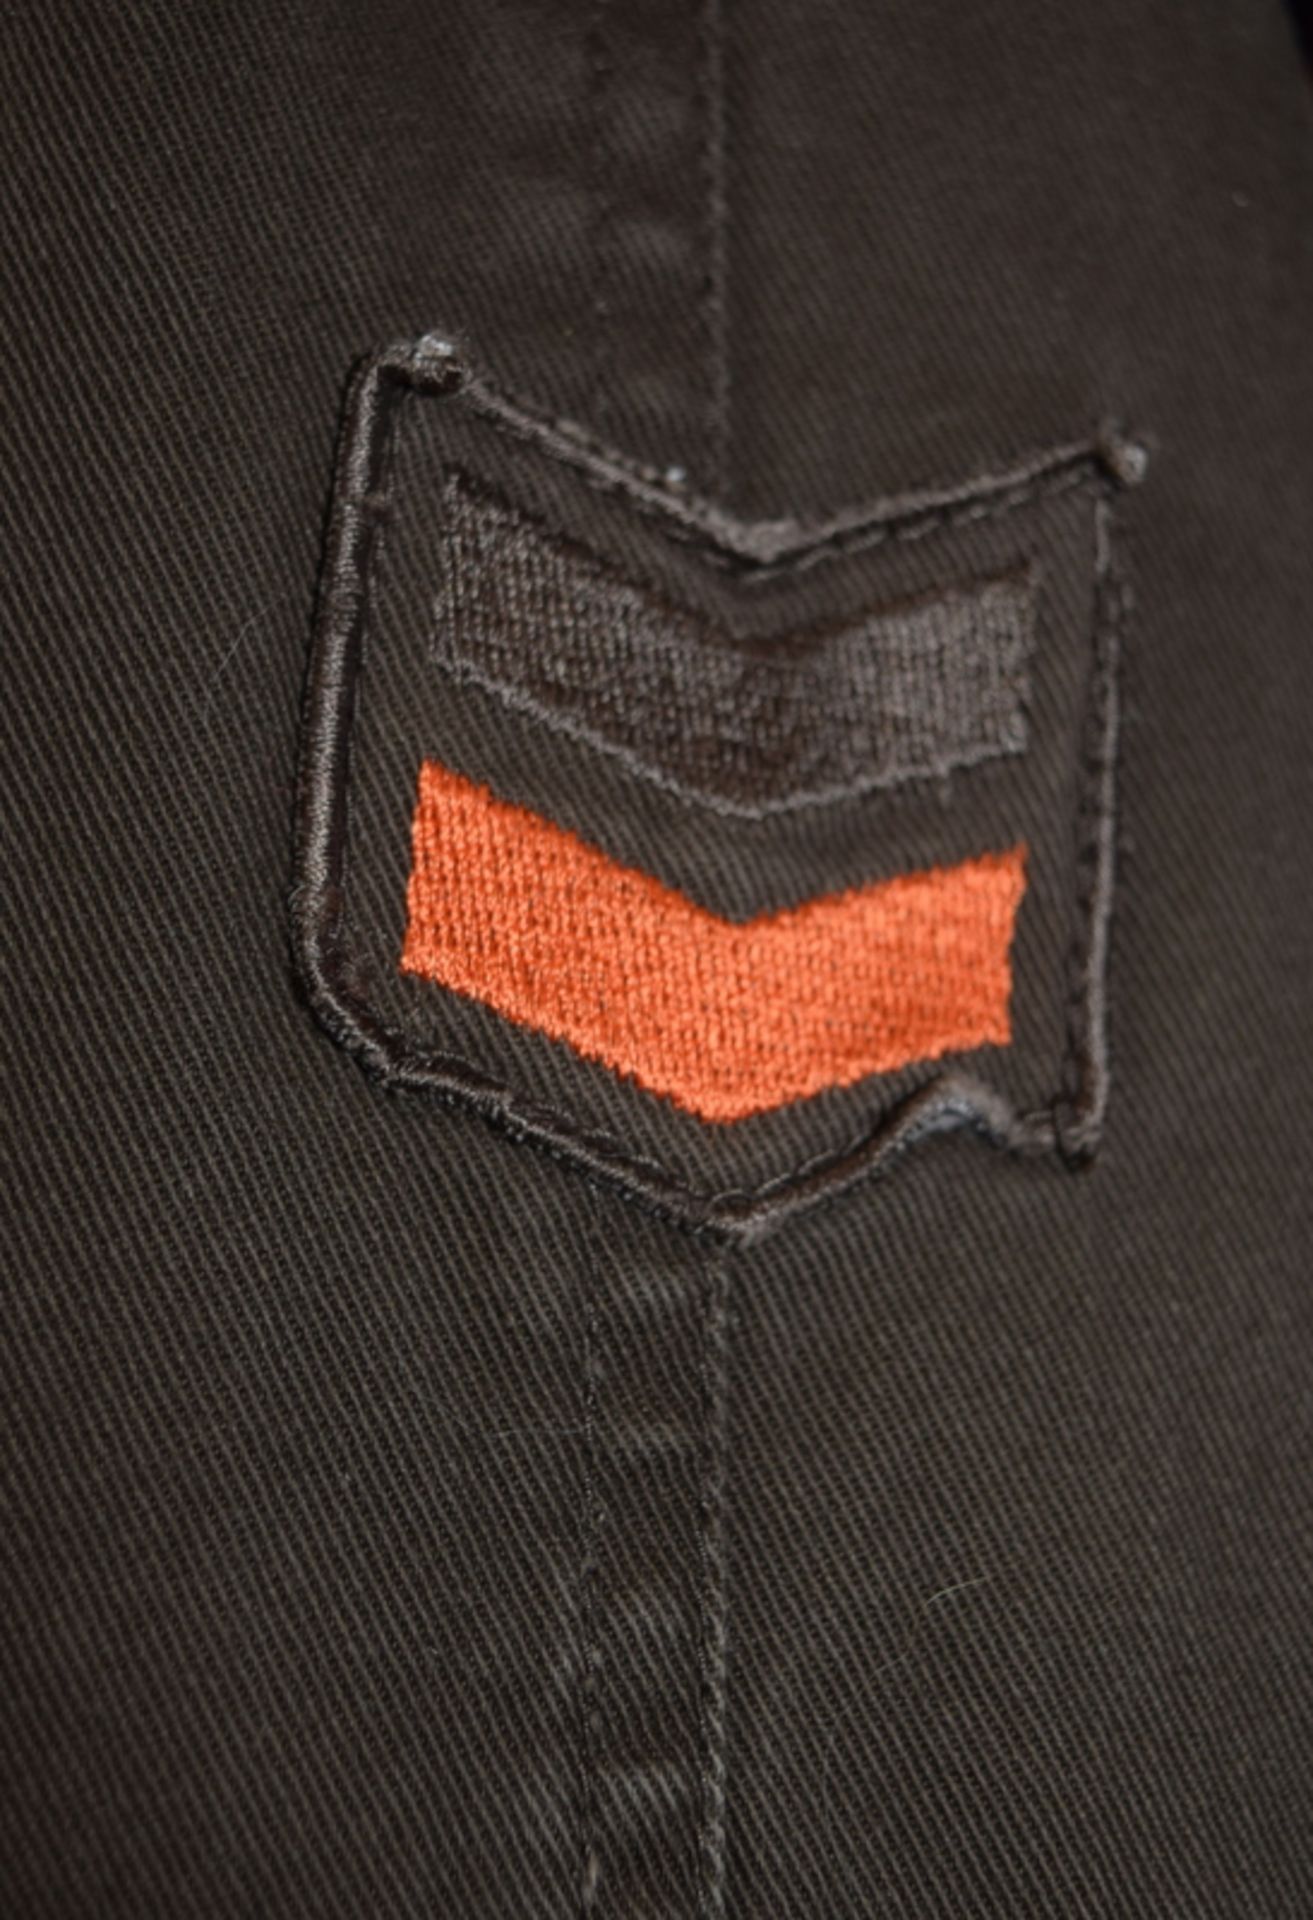 Original US Army Issue Parka - Image 2 of 3